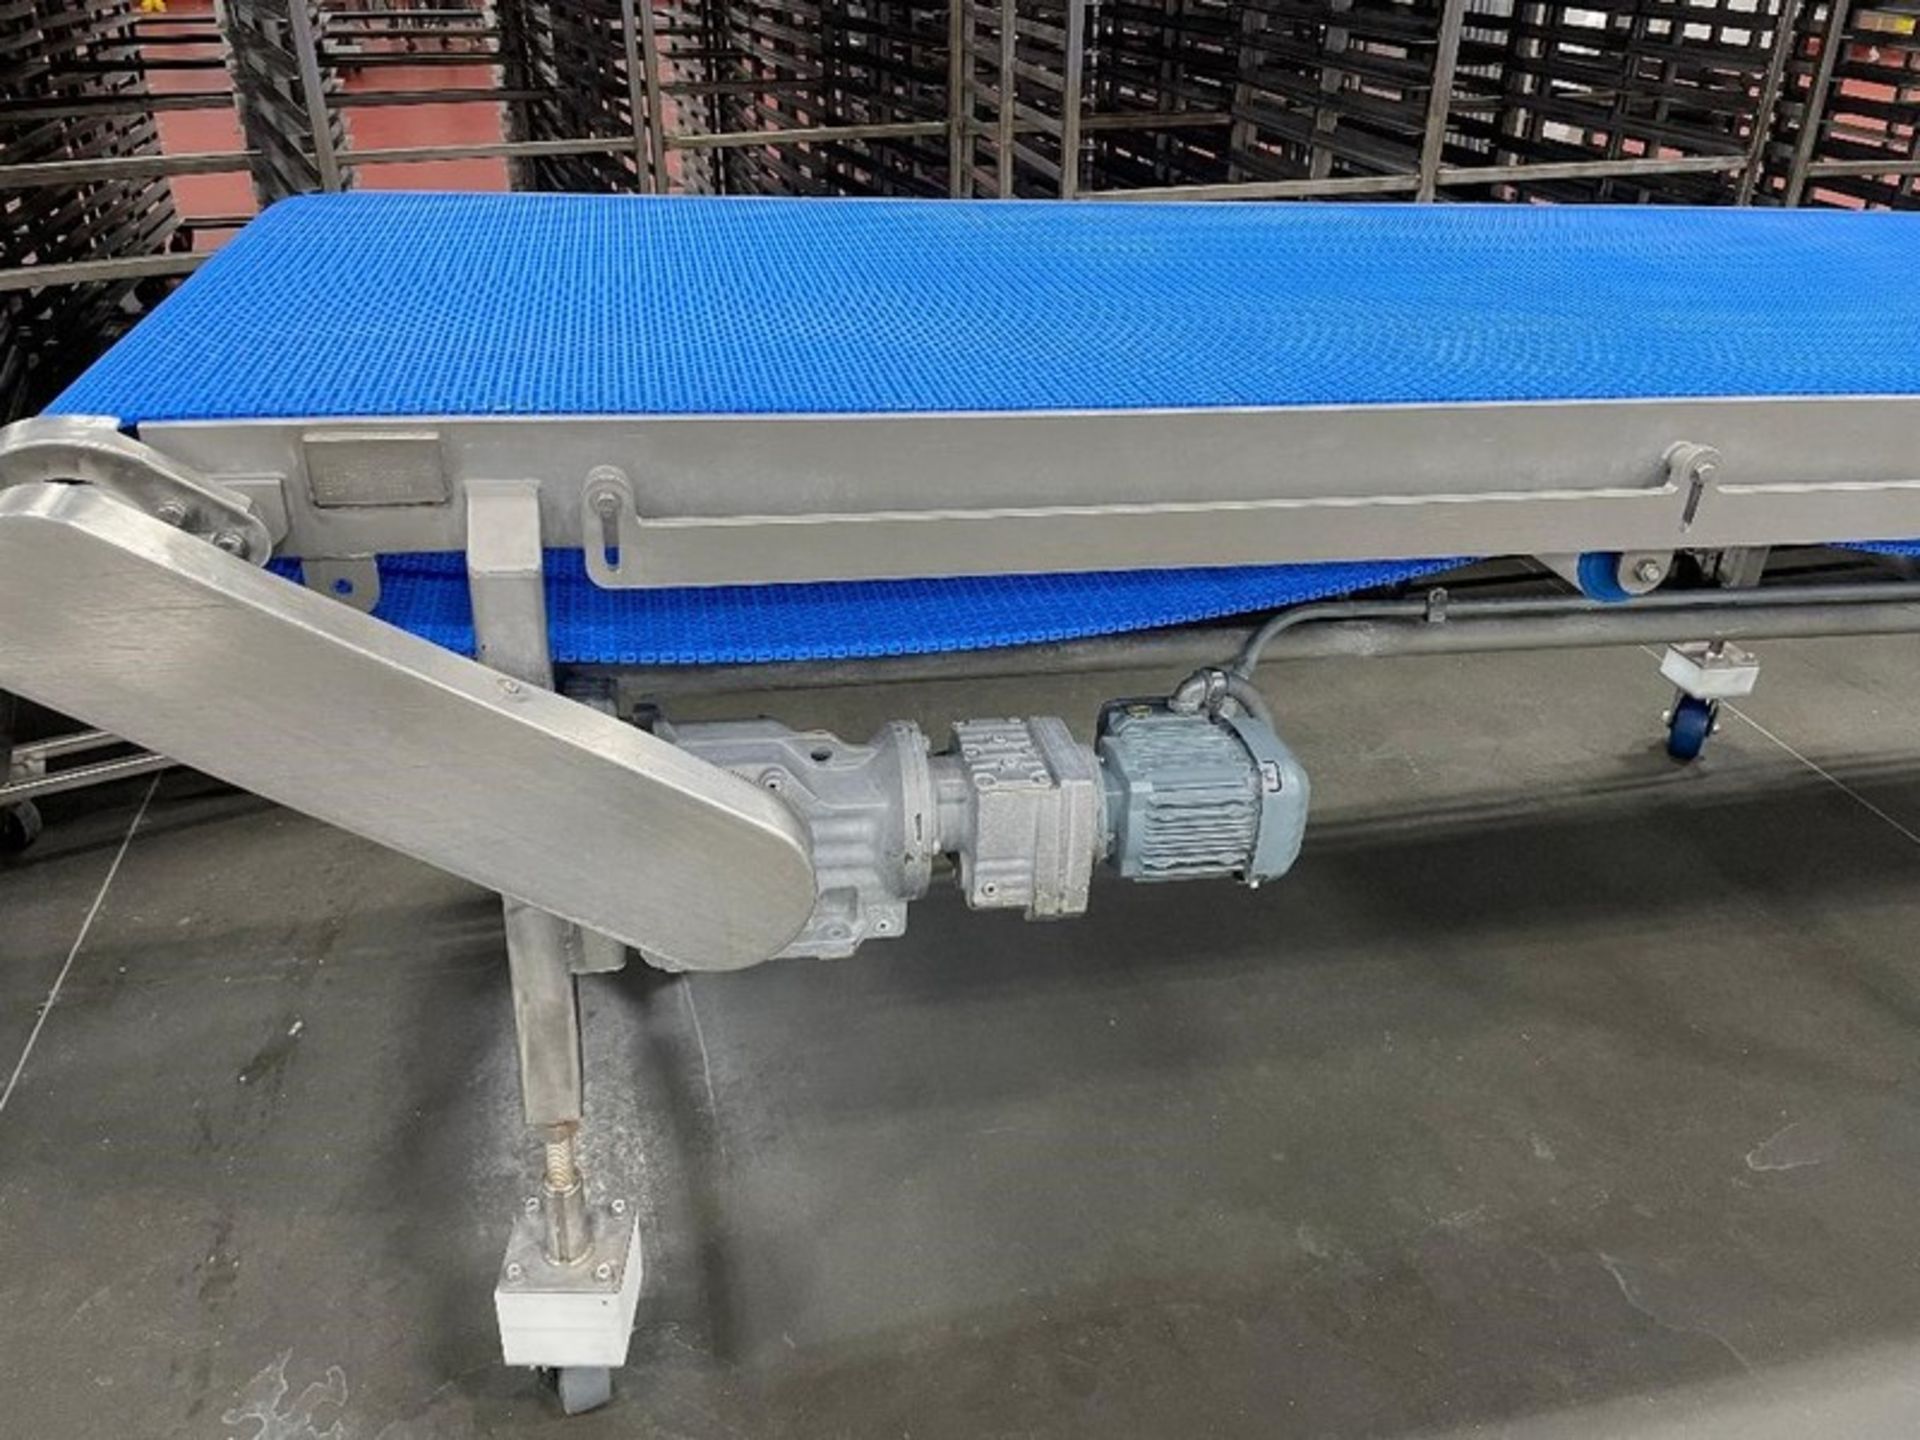 Kofab S/S Blue Belt Intralox Conveyor, Aprox. 36" W x 17 ft. Long, Complete with SEW Drive Motor, - Image 2 of 3